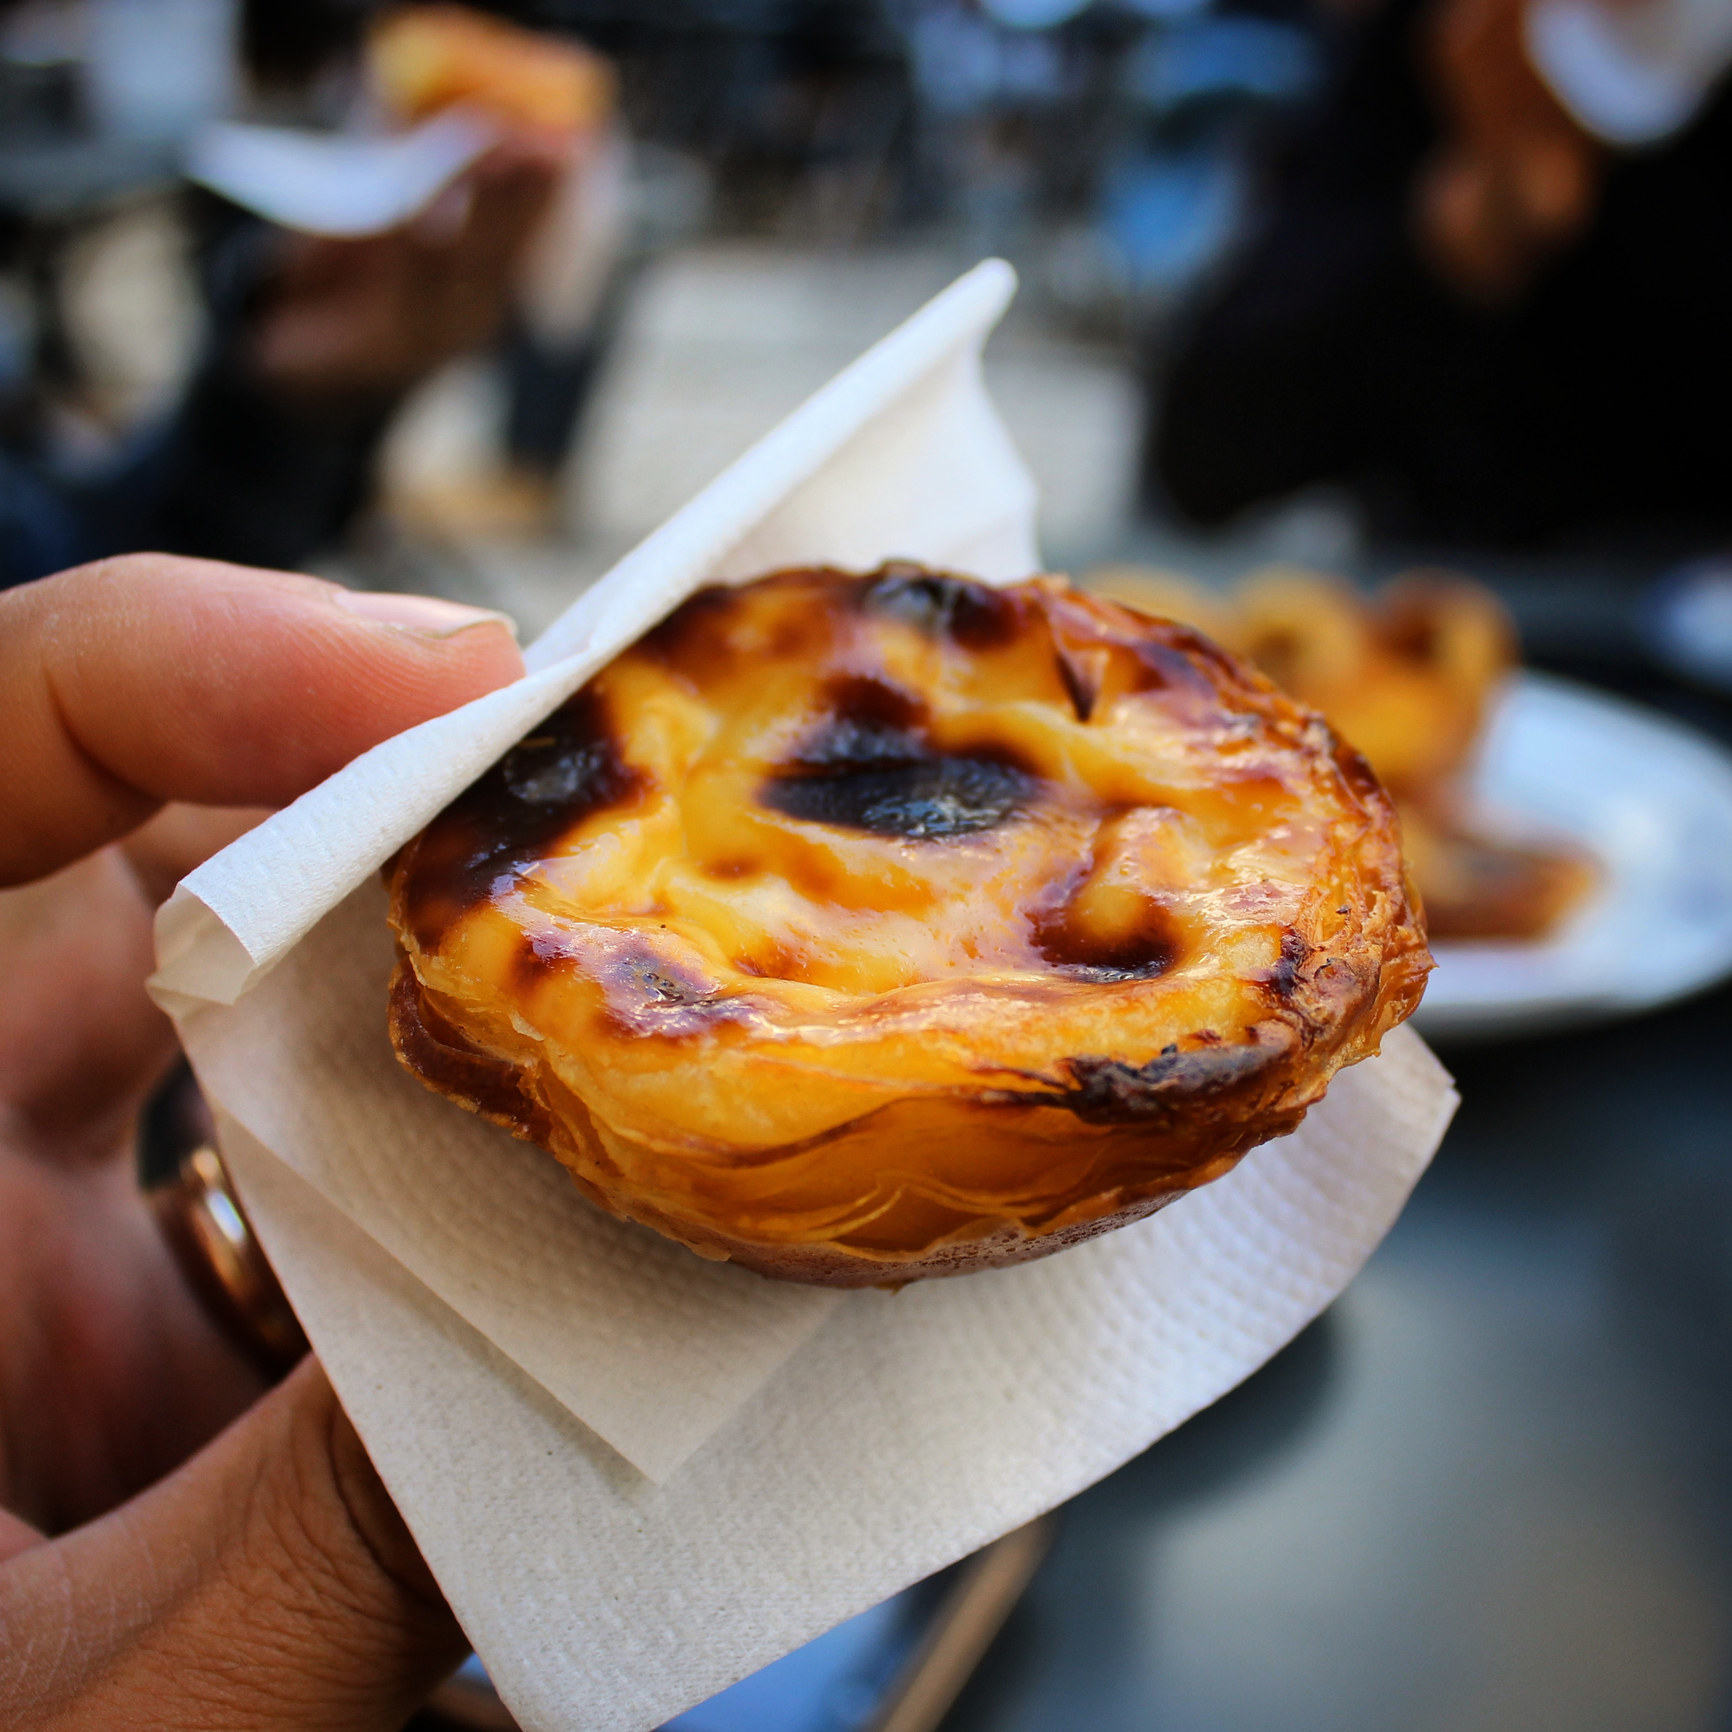 A pastry from Portugal